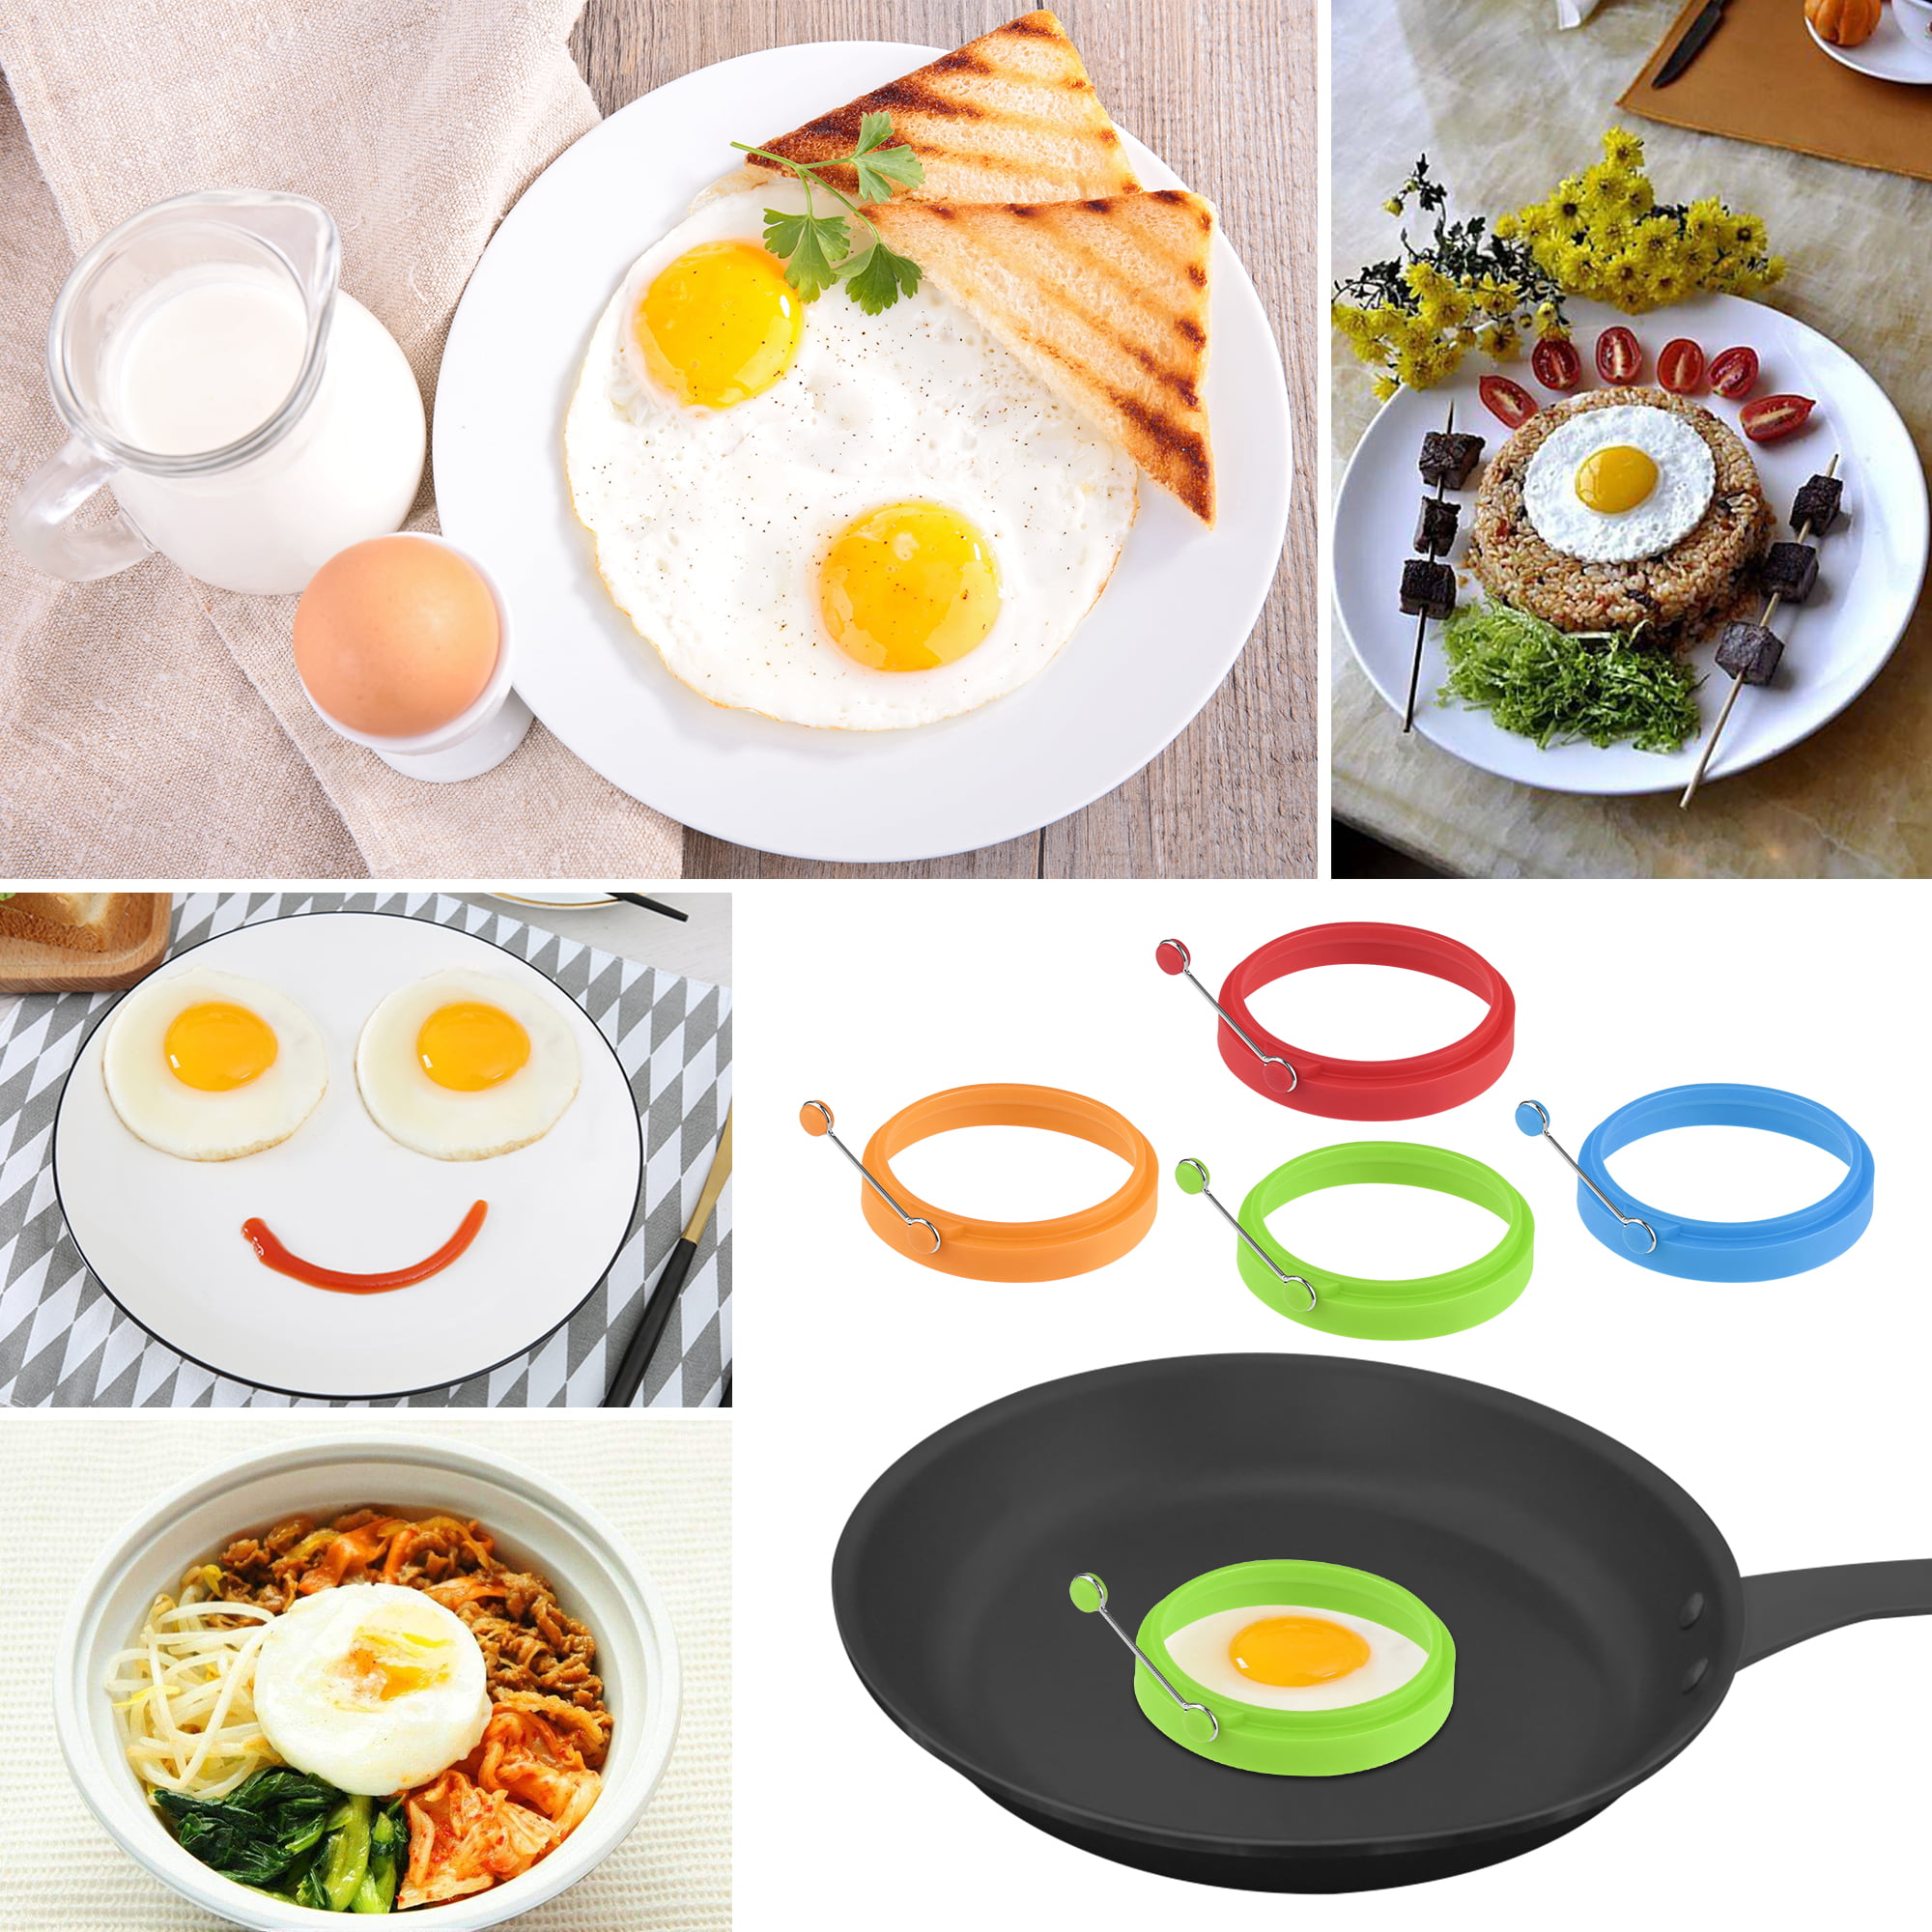 Wisremt 4 Pcs Stainless Steel Egg Cooking Rings Egg Rings with Silicone Handle Portable Grill Accessories Hamburger Meat Beef Grill Burger Press Patty Maker